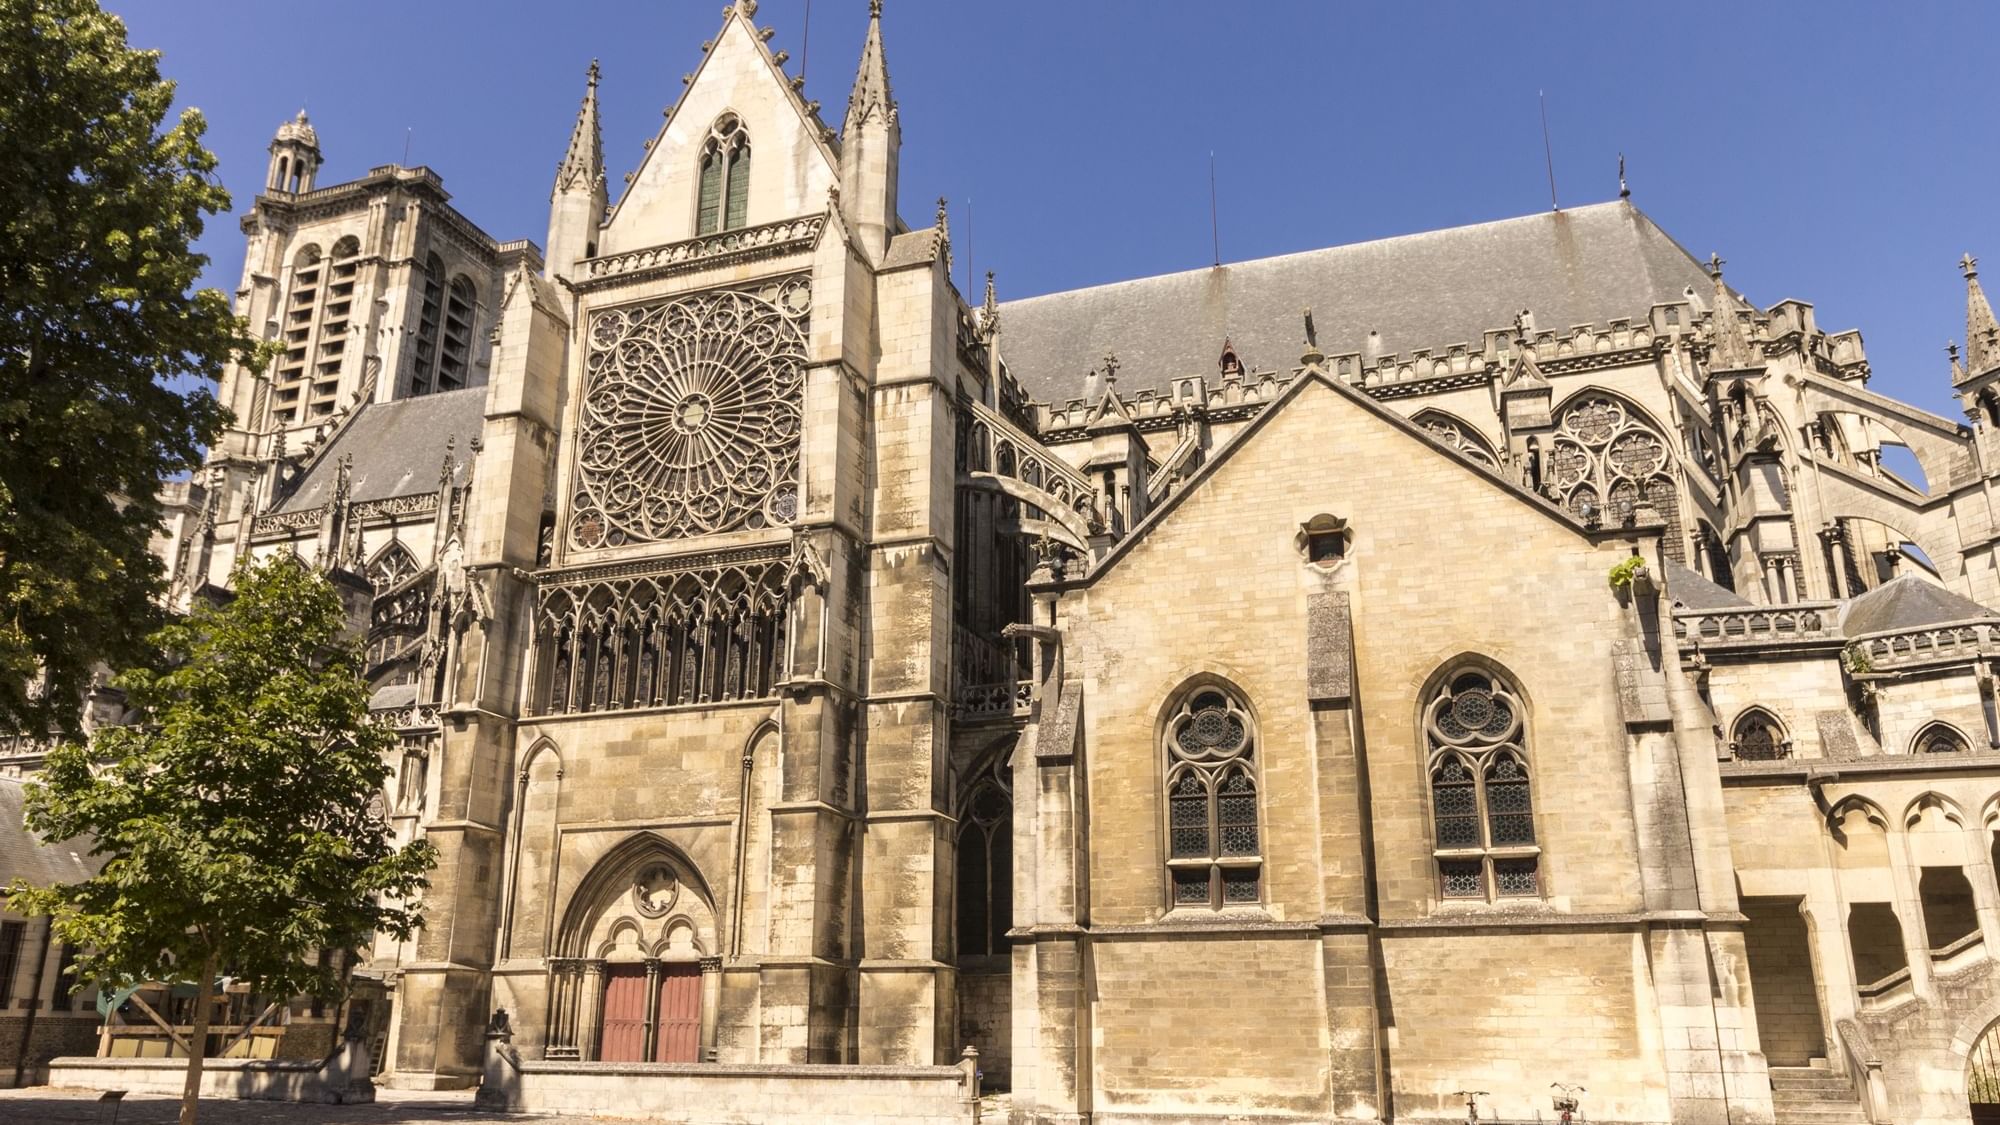 The exterior of Troyes Cathedral near Originals Hotels